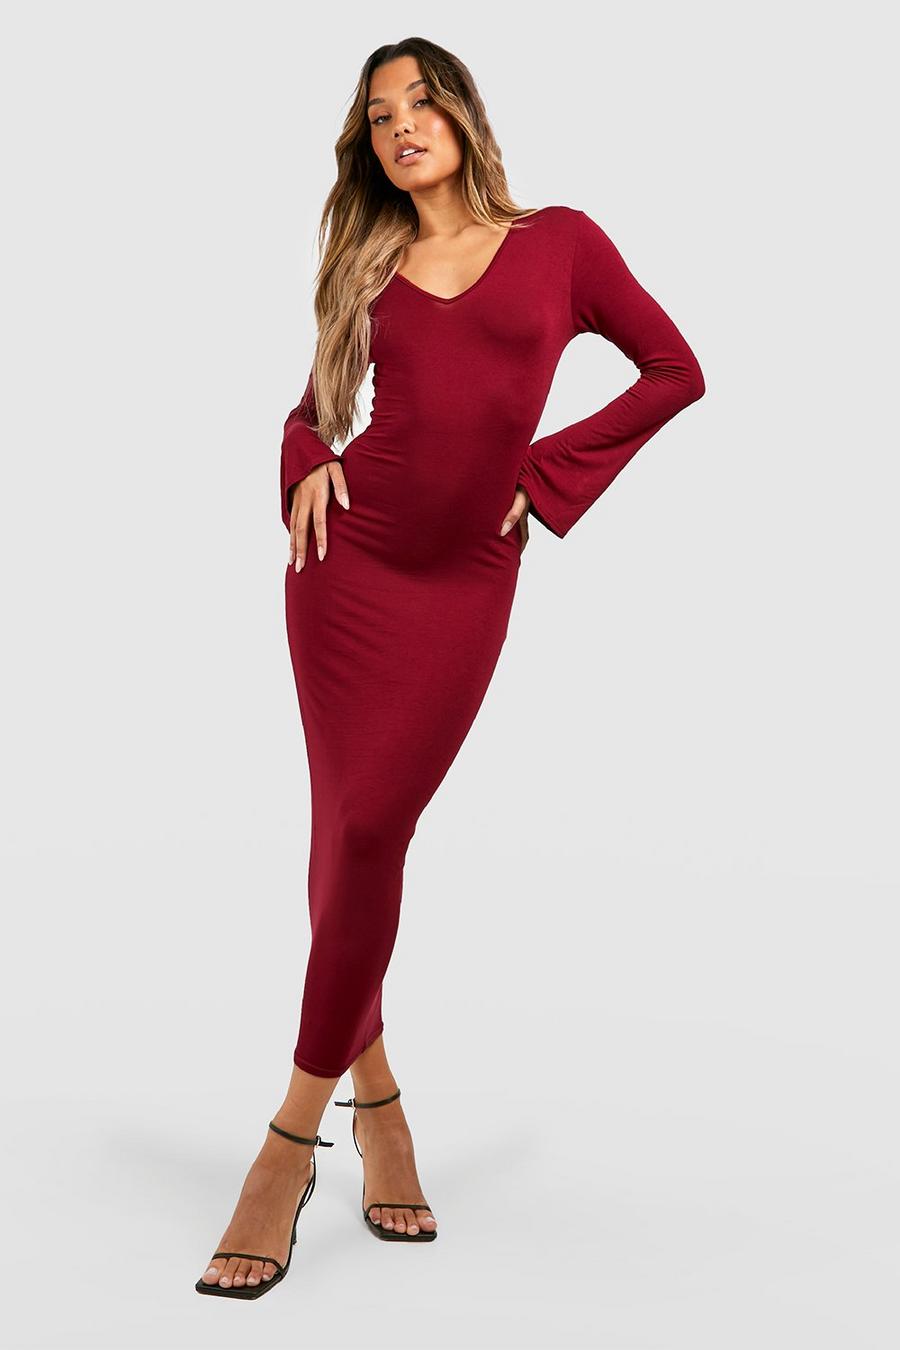 Berry red Plunge Flare Sleeve Midaxi Dress